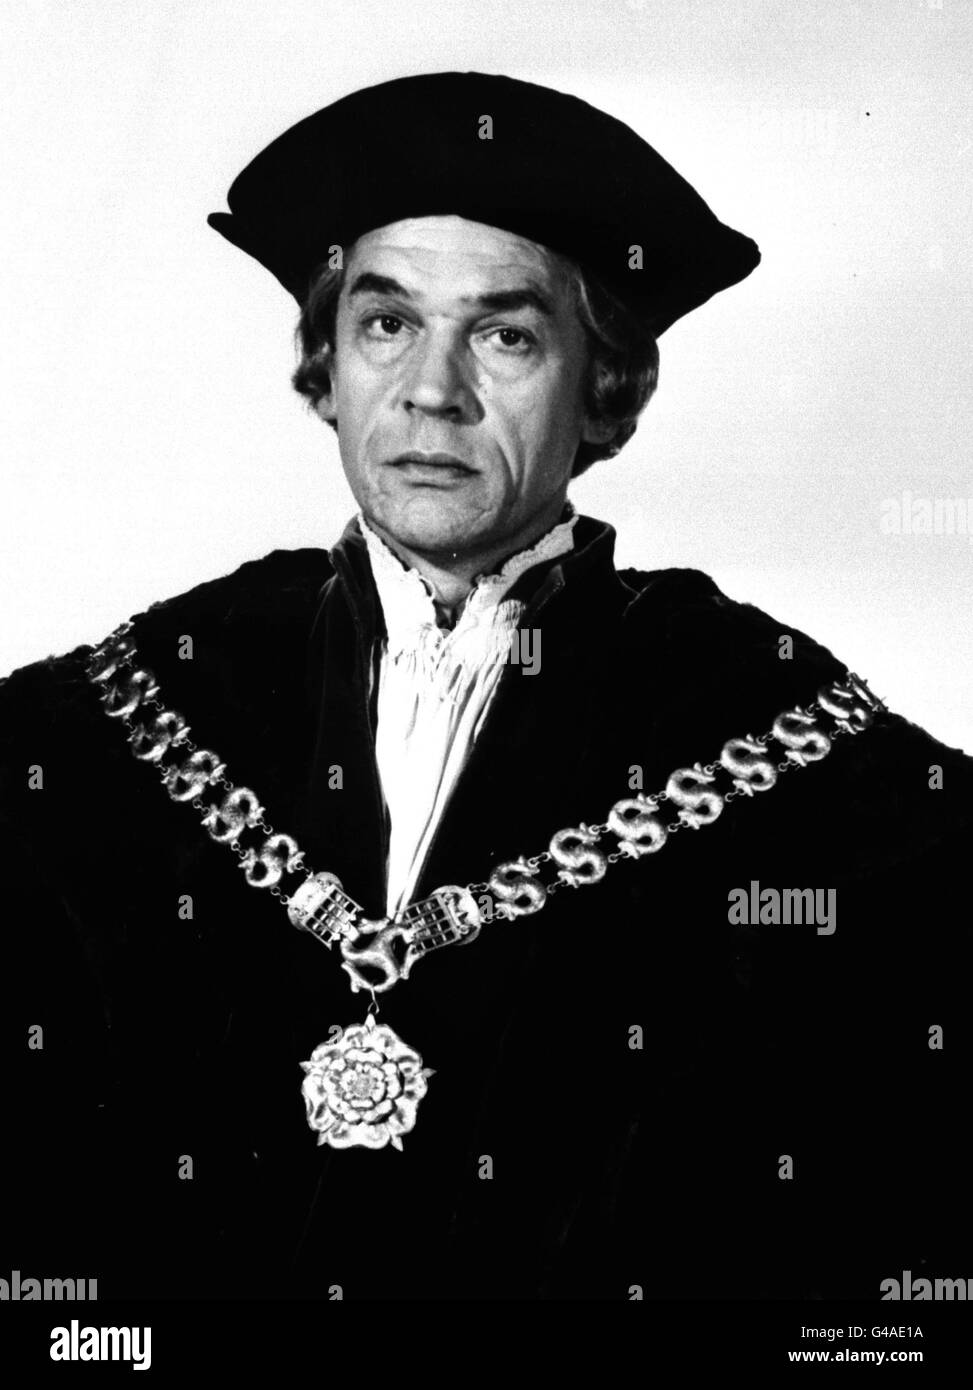 PA NEWS PHOTO 11/4/67 ACTOR PAUL SCOFIELD AS SIR THOMAS MORE IN THE FILM  'A MAN FOR ALL SEASONS'. THE ROLE THAT WON HIM THE ACADEMY AWARD FOR BEST PERFORMANCE BY AN ACTOR. Stock Photo